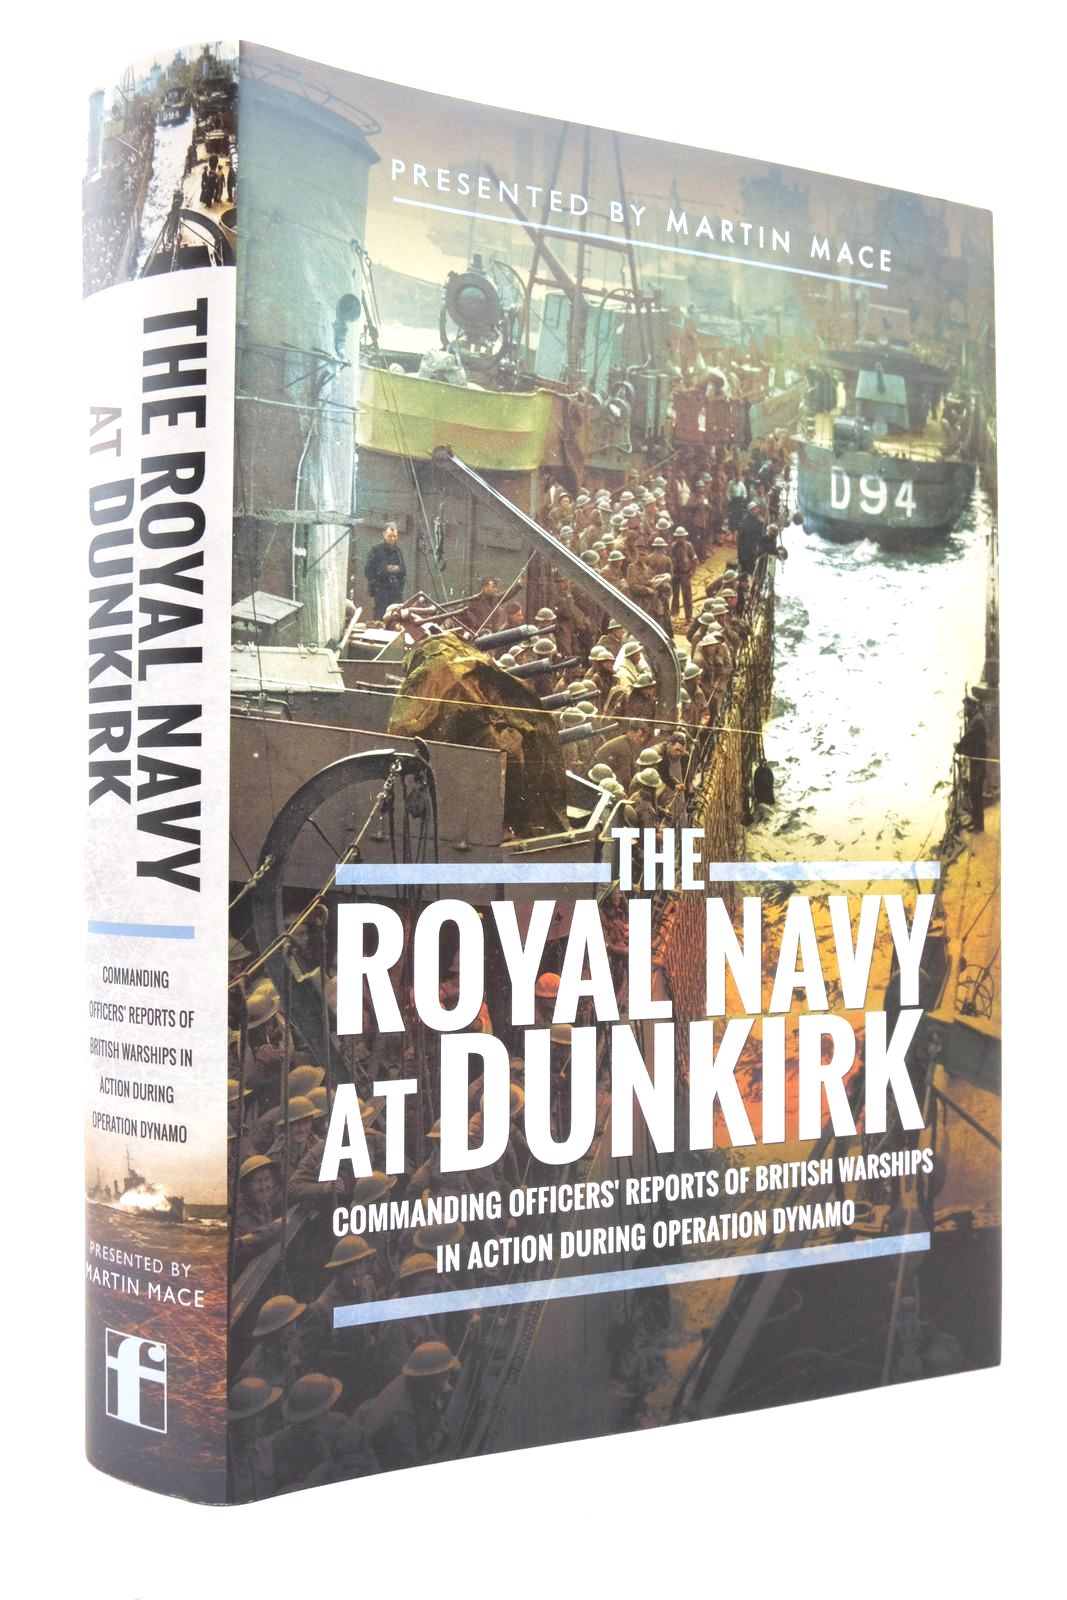 Photo of THE ROYAL NAVY AT DUNKIRK: COMMANDING OFFICERS' REPORTS OF BRITISH WARSHIPS IN ACTION DURING OPERATION DYNAMO- Stock Number: 2138139